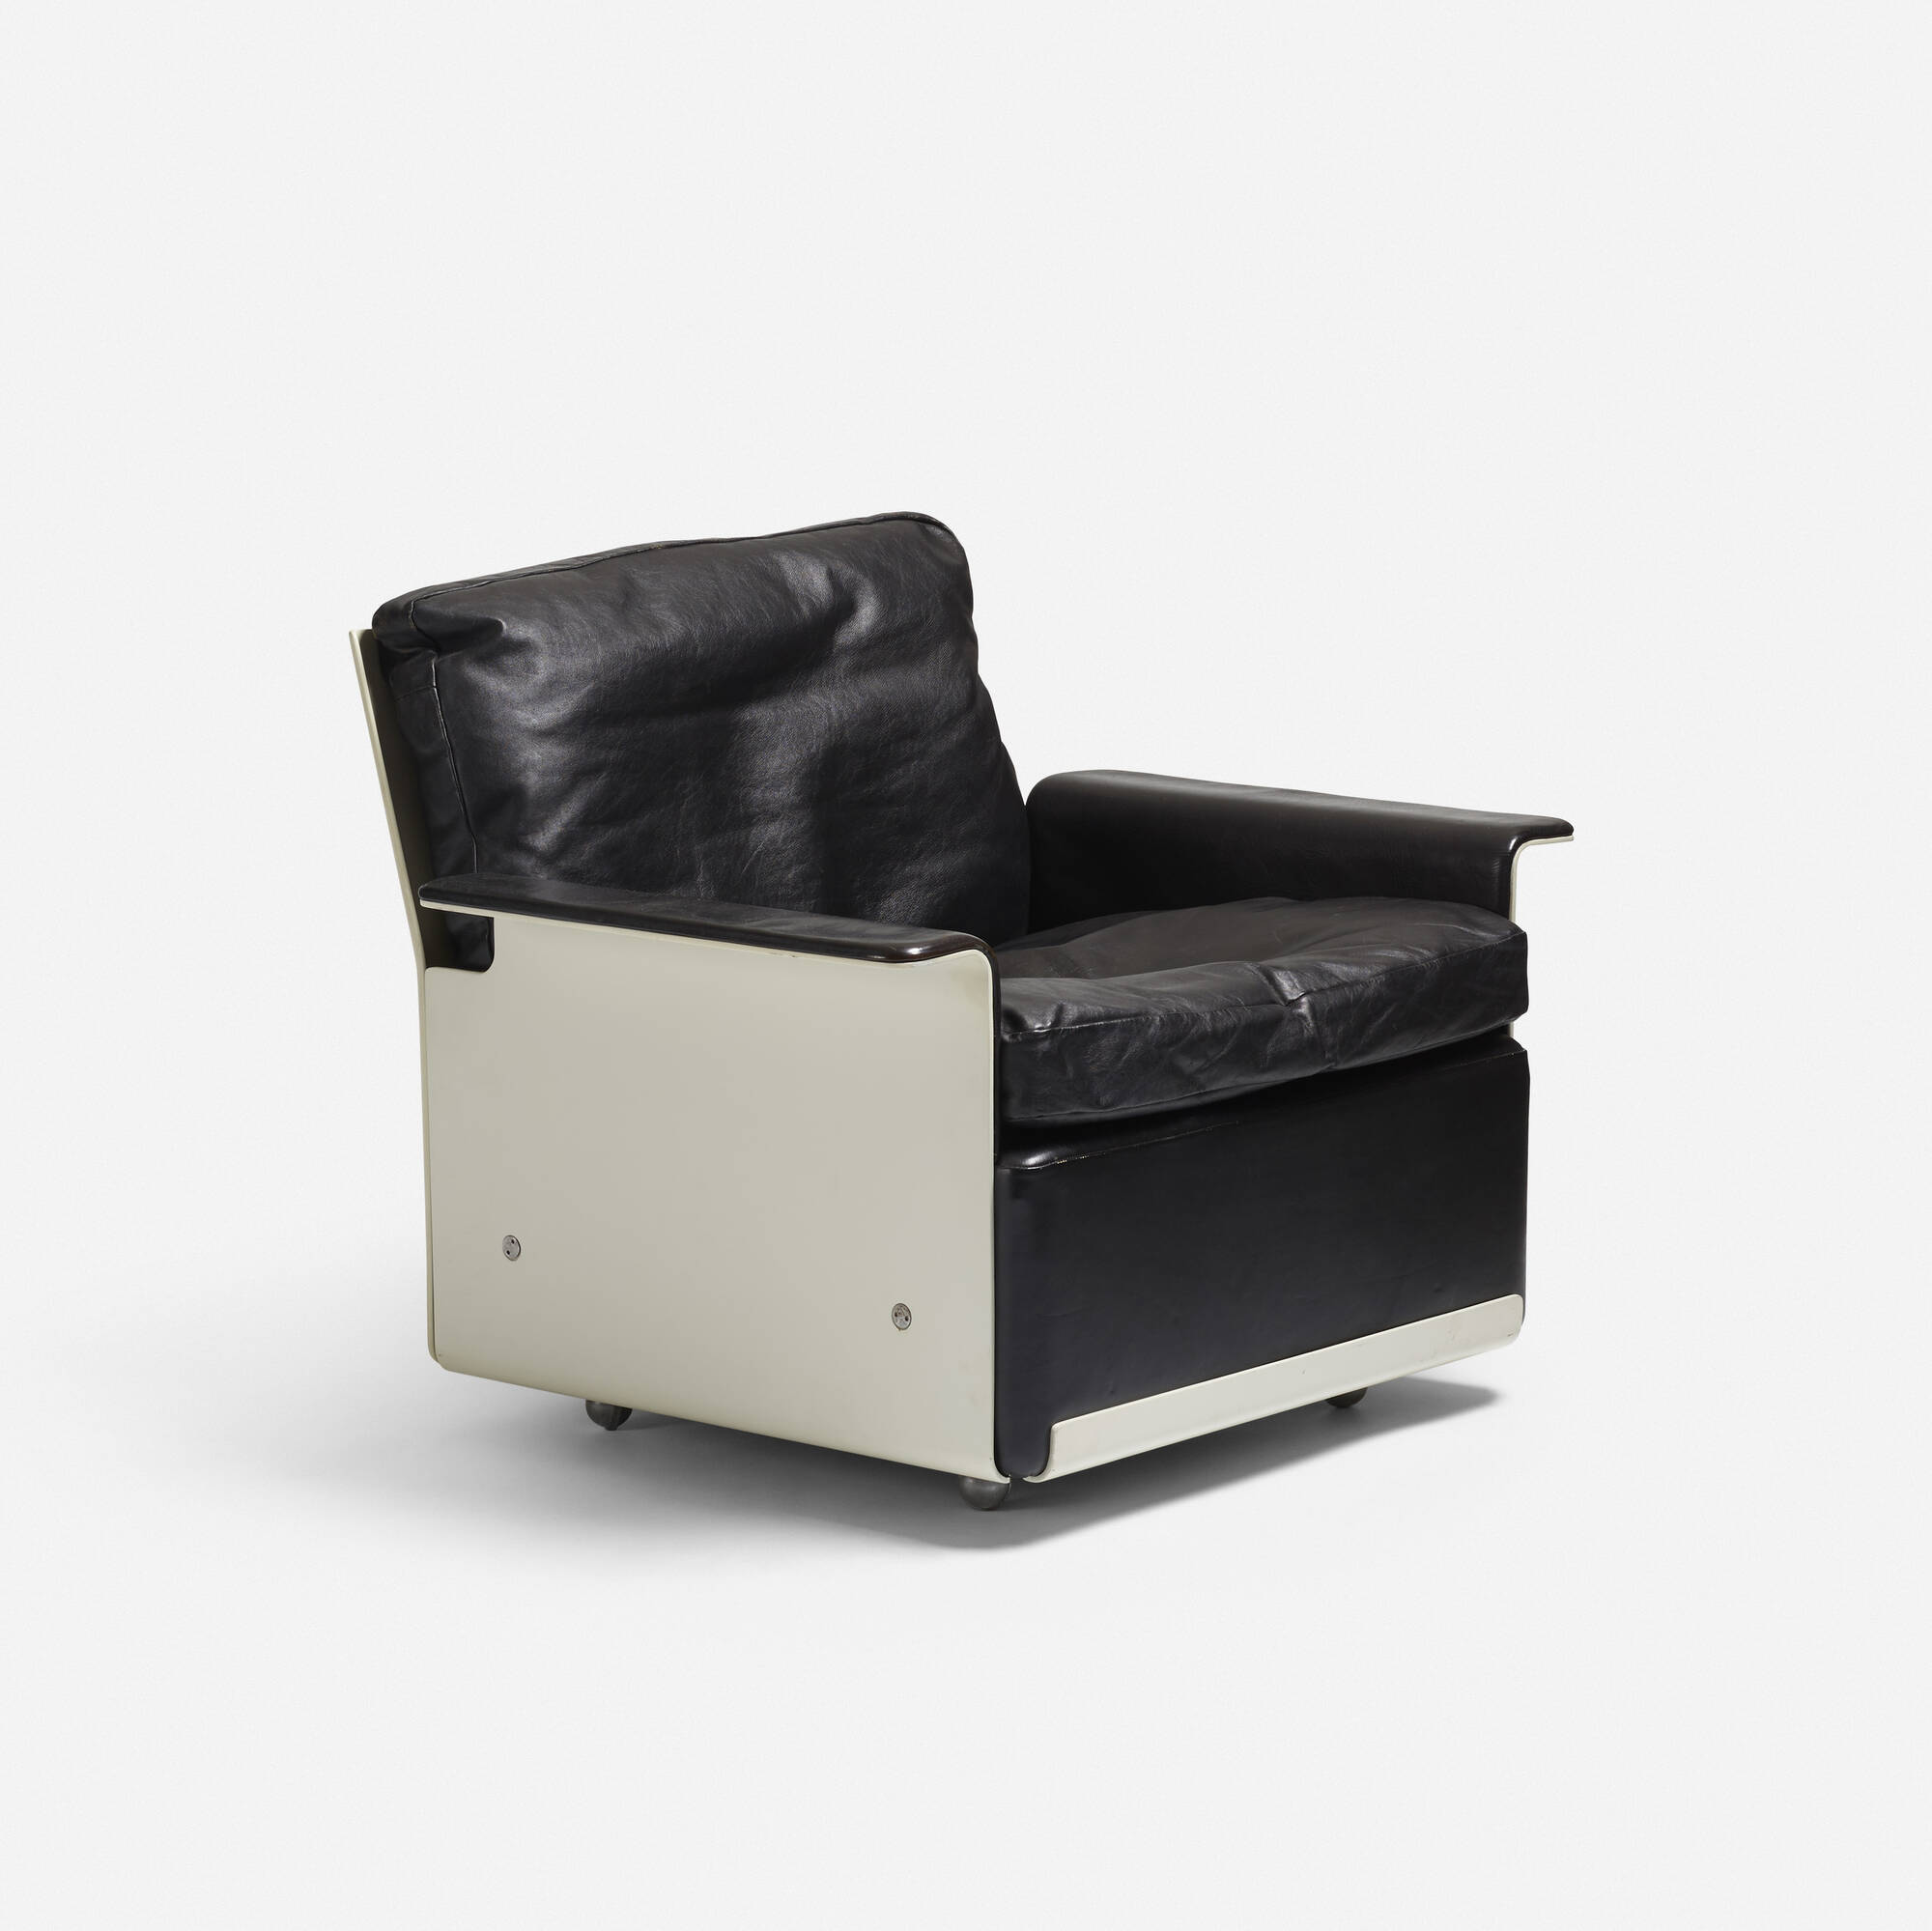 indelukke partiskhed arm 154: DIETER RAMS, First generation 620 lounge chair < Dieter Rams: The JF  Chen Collection, 12 July 2018 < Auctions | Wright: Auctions of Art and  Design